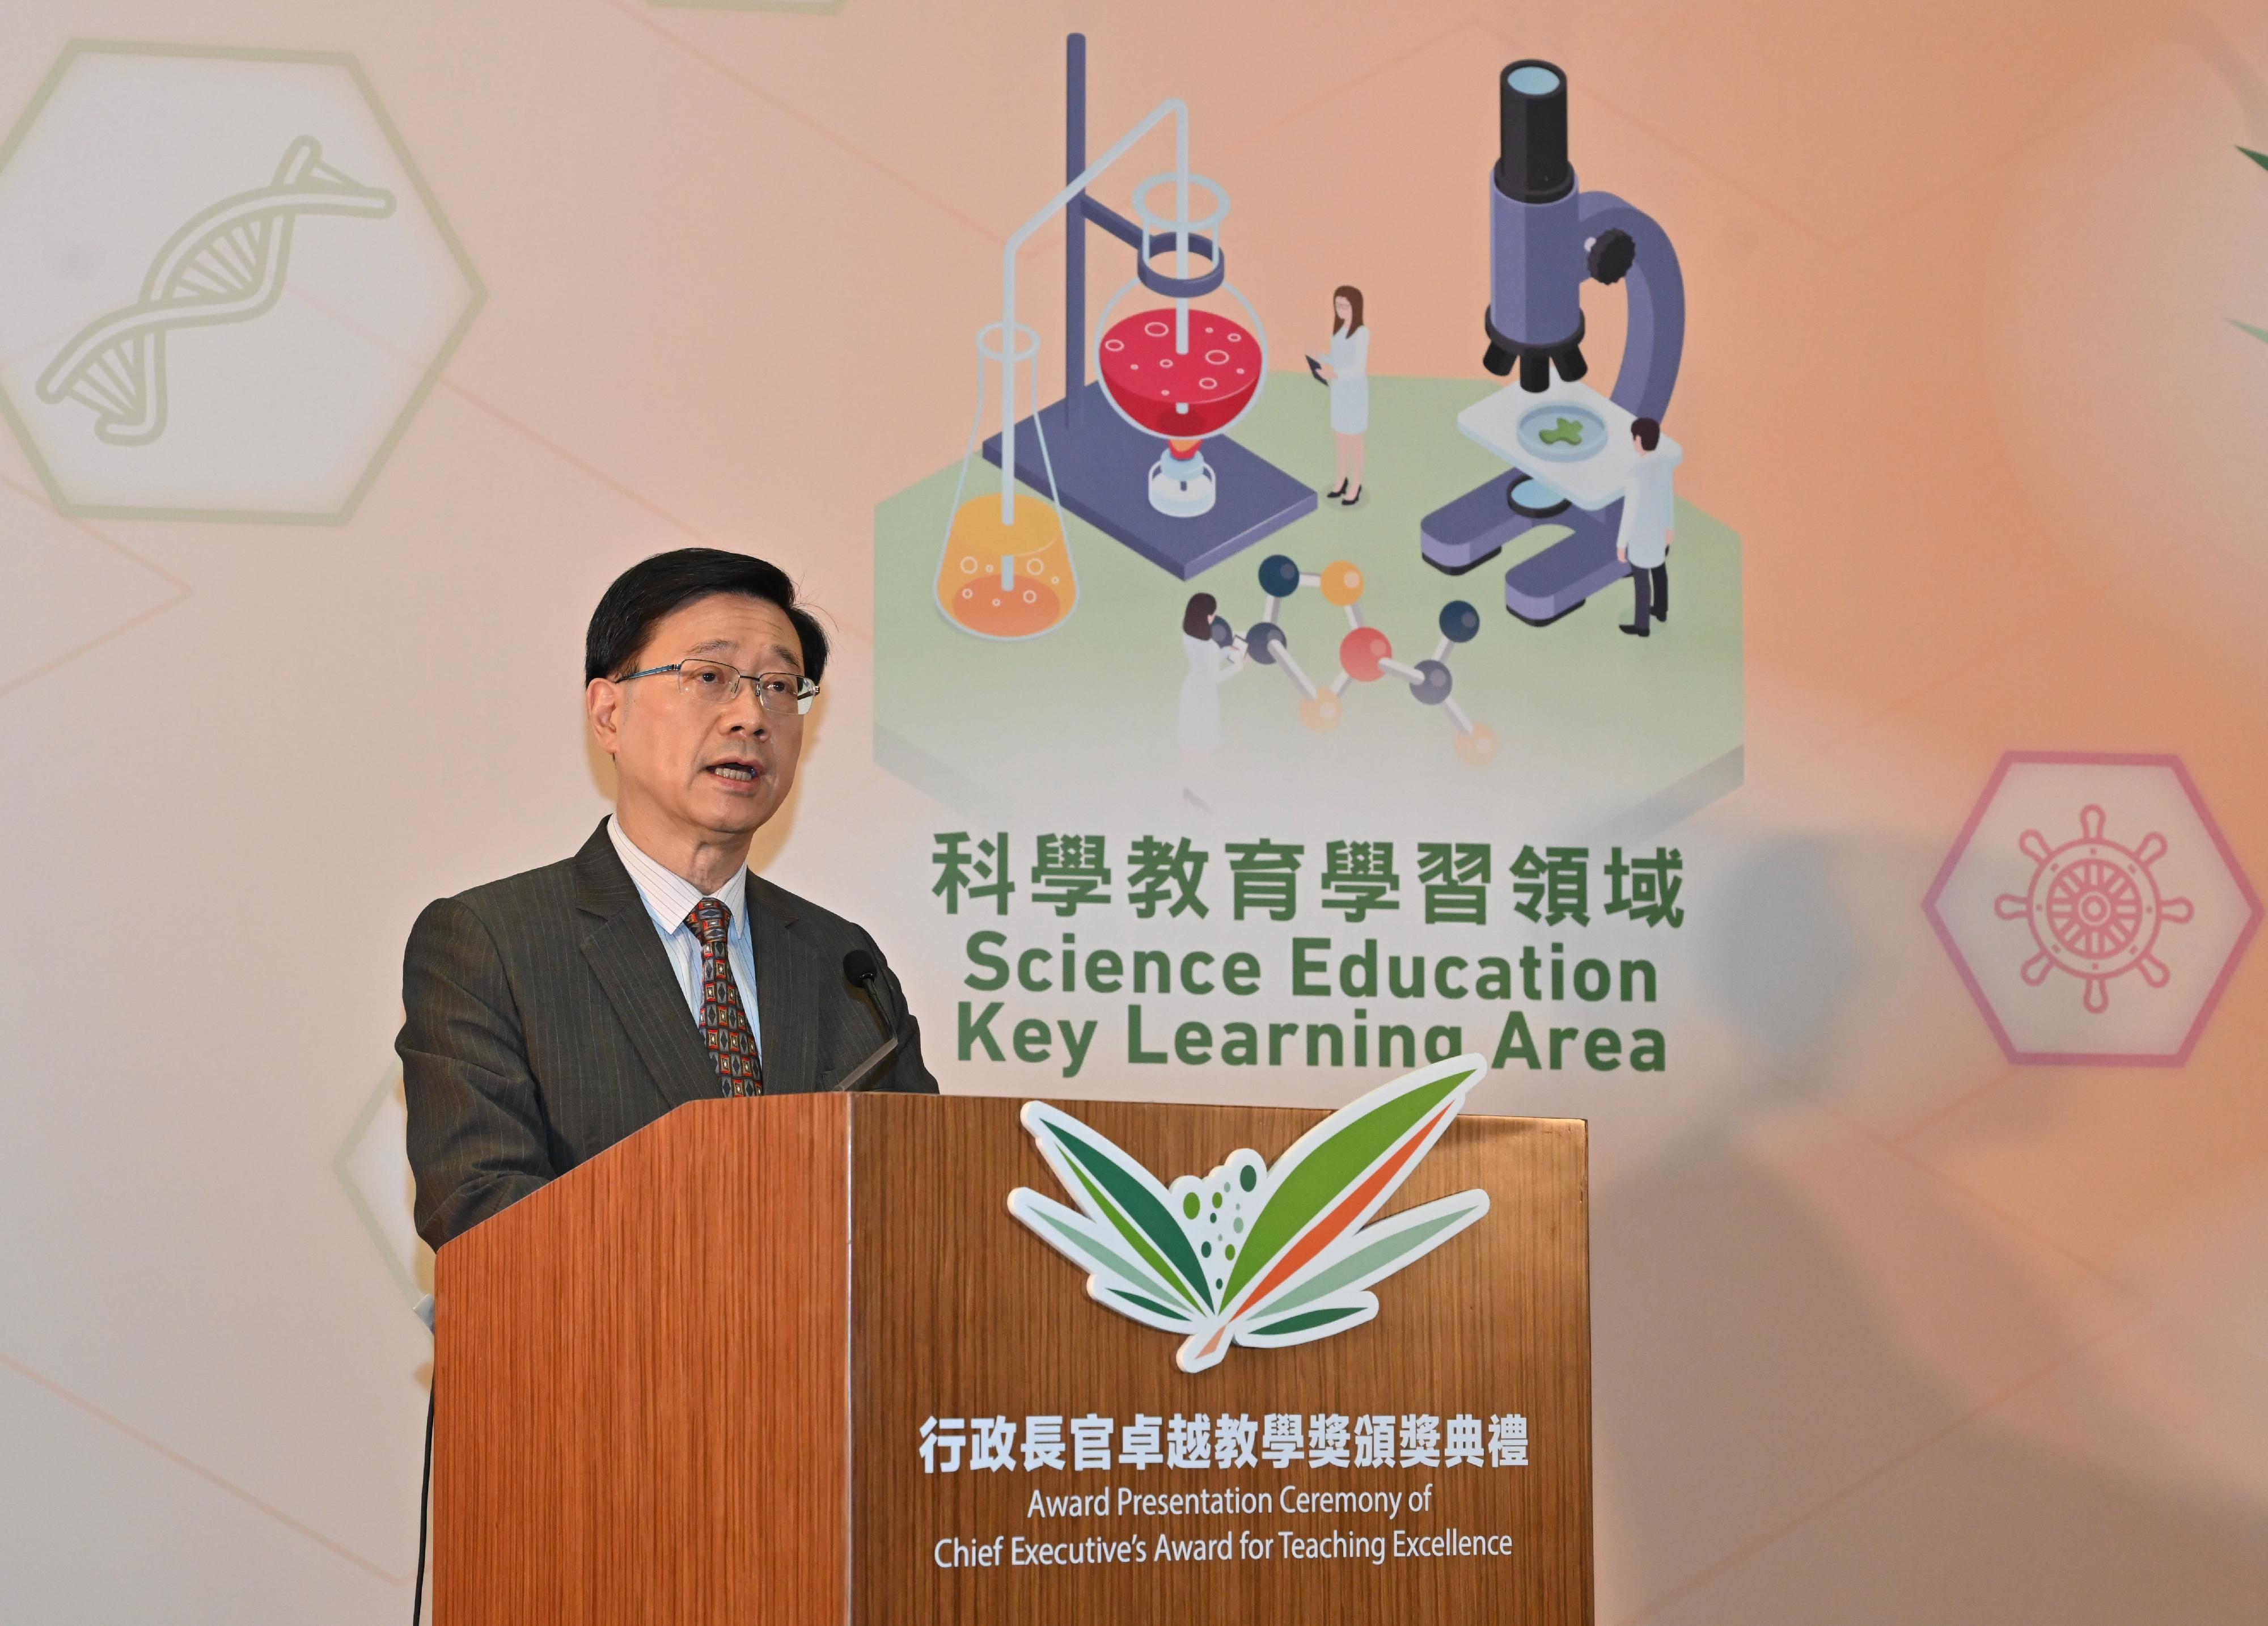 The Chief Executive, Mr John Lee, speaks at the Award Presentation Ceremony of the Chief Executive's Award for Teaching Excellence today (November 4).